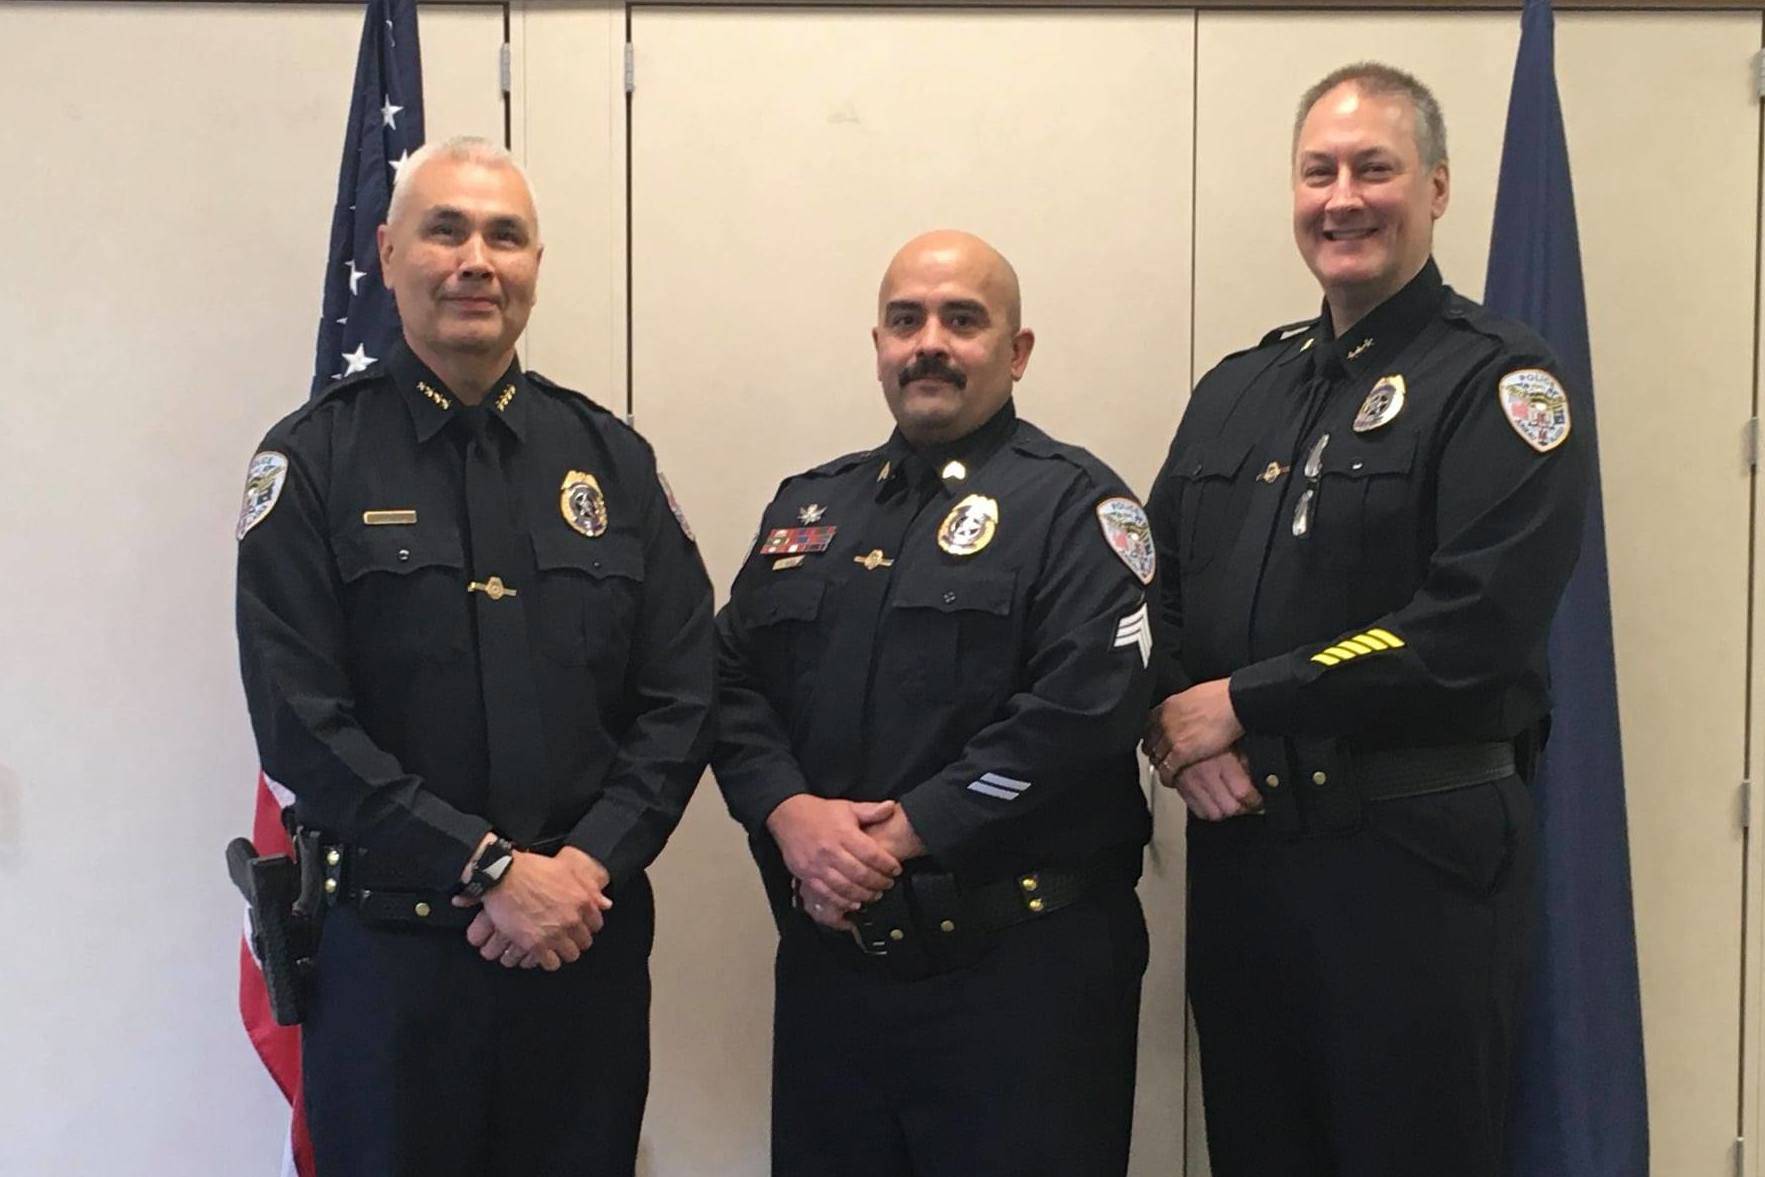 Juneau Police Department Chief Ed Mercer, left, and Deputy Chief David Campbell, right, pose with Sgt. Nick Garza, center, for Garza's promotion to sergeant on Oct. 14, 2020. (Courtesy photo / JPD)